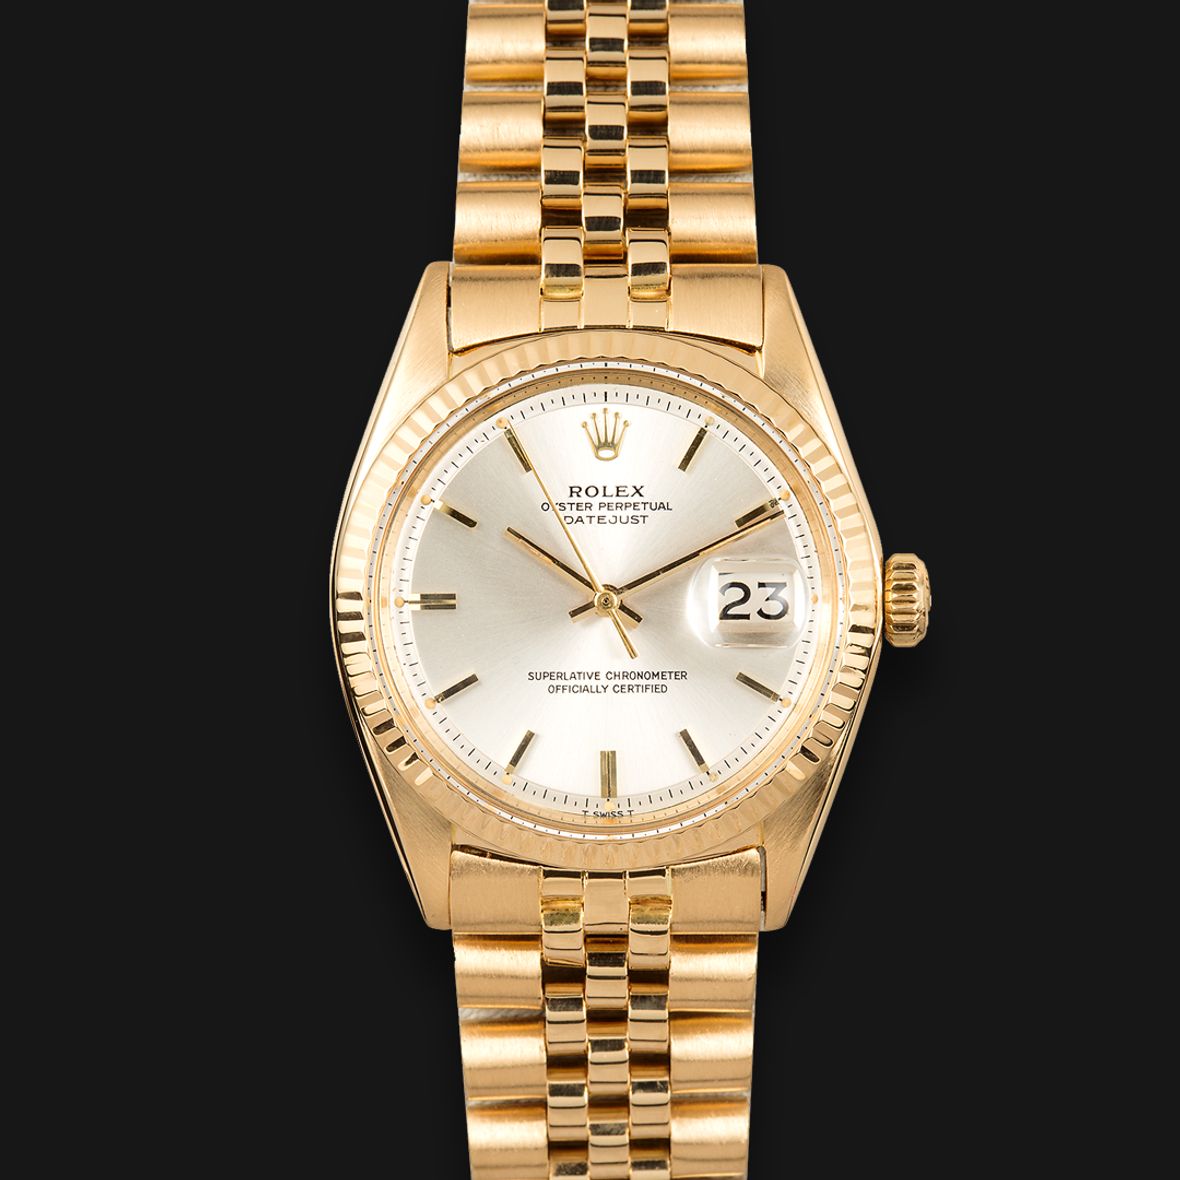 martin luther king rolex